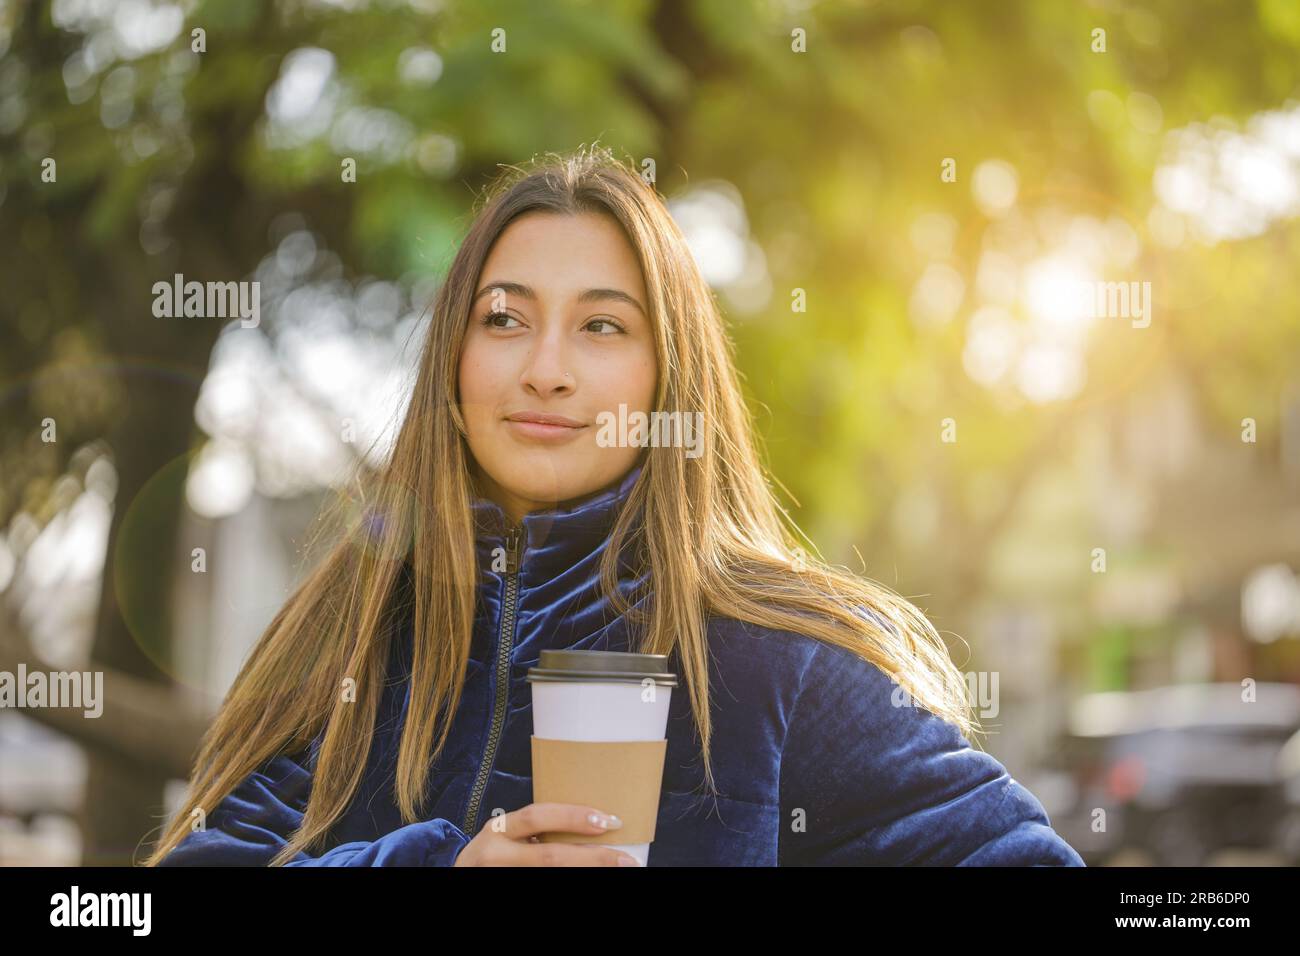 Portrait of beautiful latin girl drinking coffee on a public park bench with copy space. Stock Photo